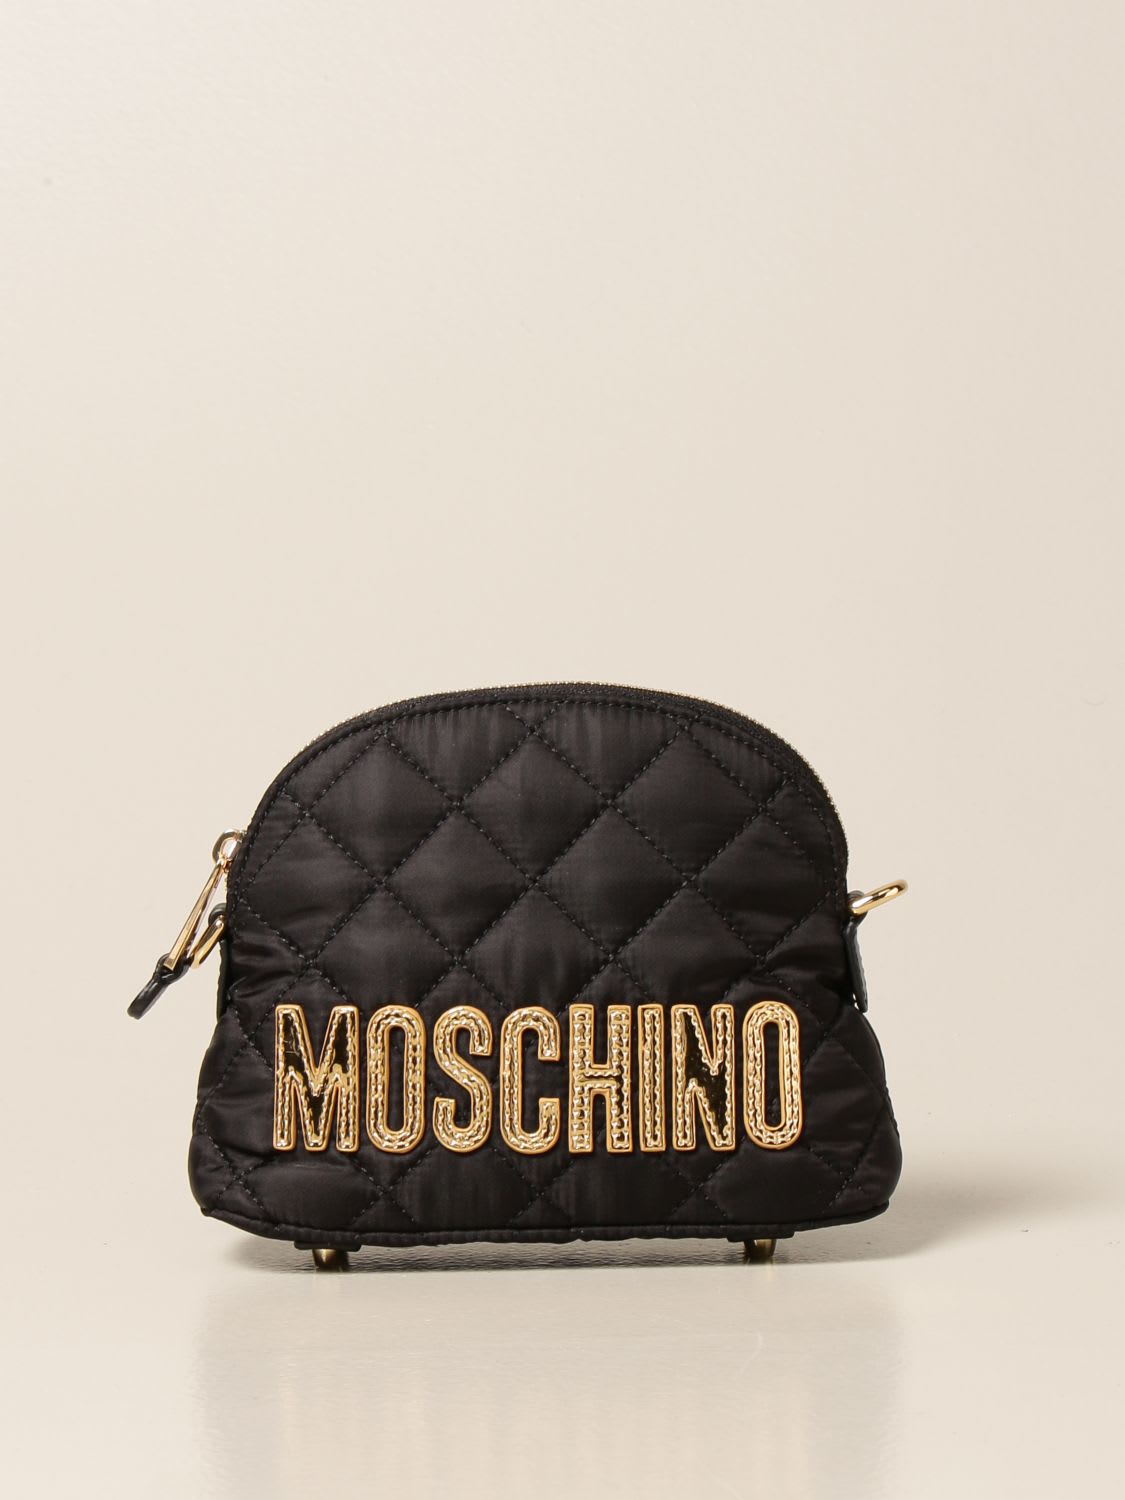 MOSCHINO COUTURE BAG IN QUILTED NYLON,7404 8201 2555